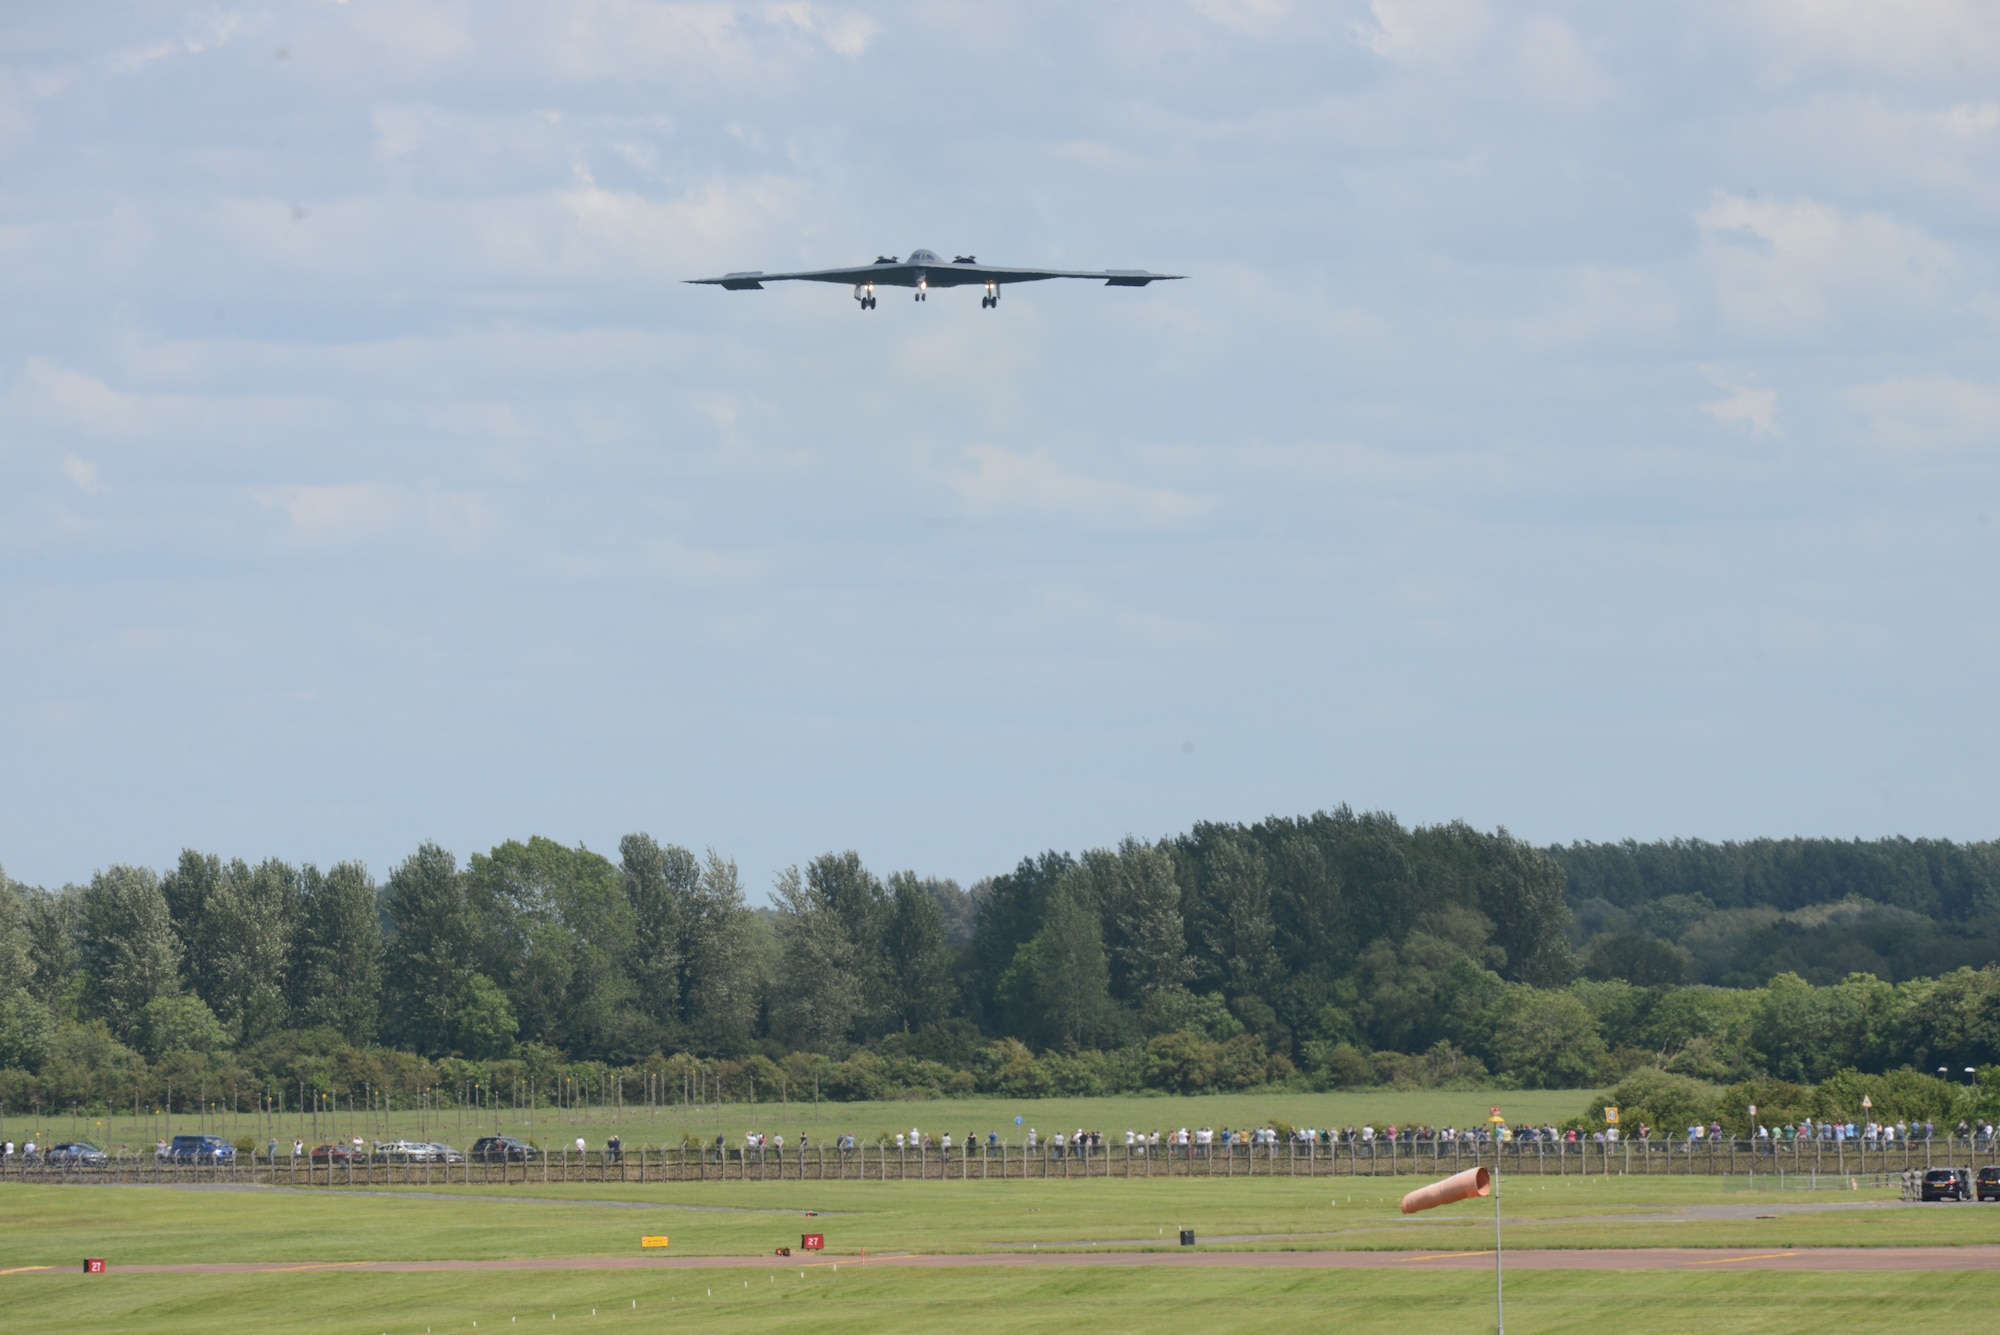 A B-2 Spirit from the 509th Bomb Wing, Whiteman Air Force Base, Missouri, prepares to land on the runway at RAF Fairford, England, June 8, 2014. The B-2 Spirit is a multi-role bomber capable of delivering both conventional and nuclear munitions. (U.S. Air Force photo by Tech. Sgt. Chrissy Best/Released)